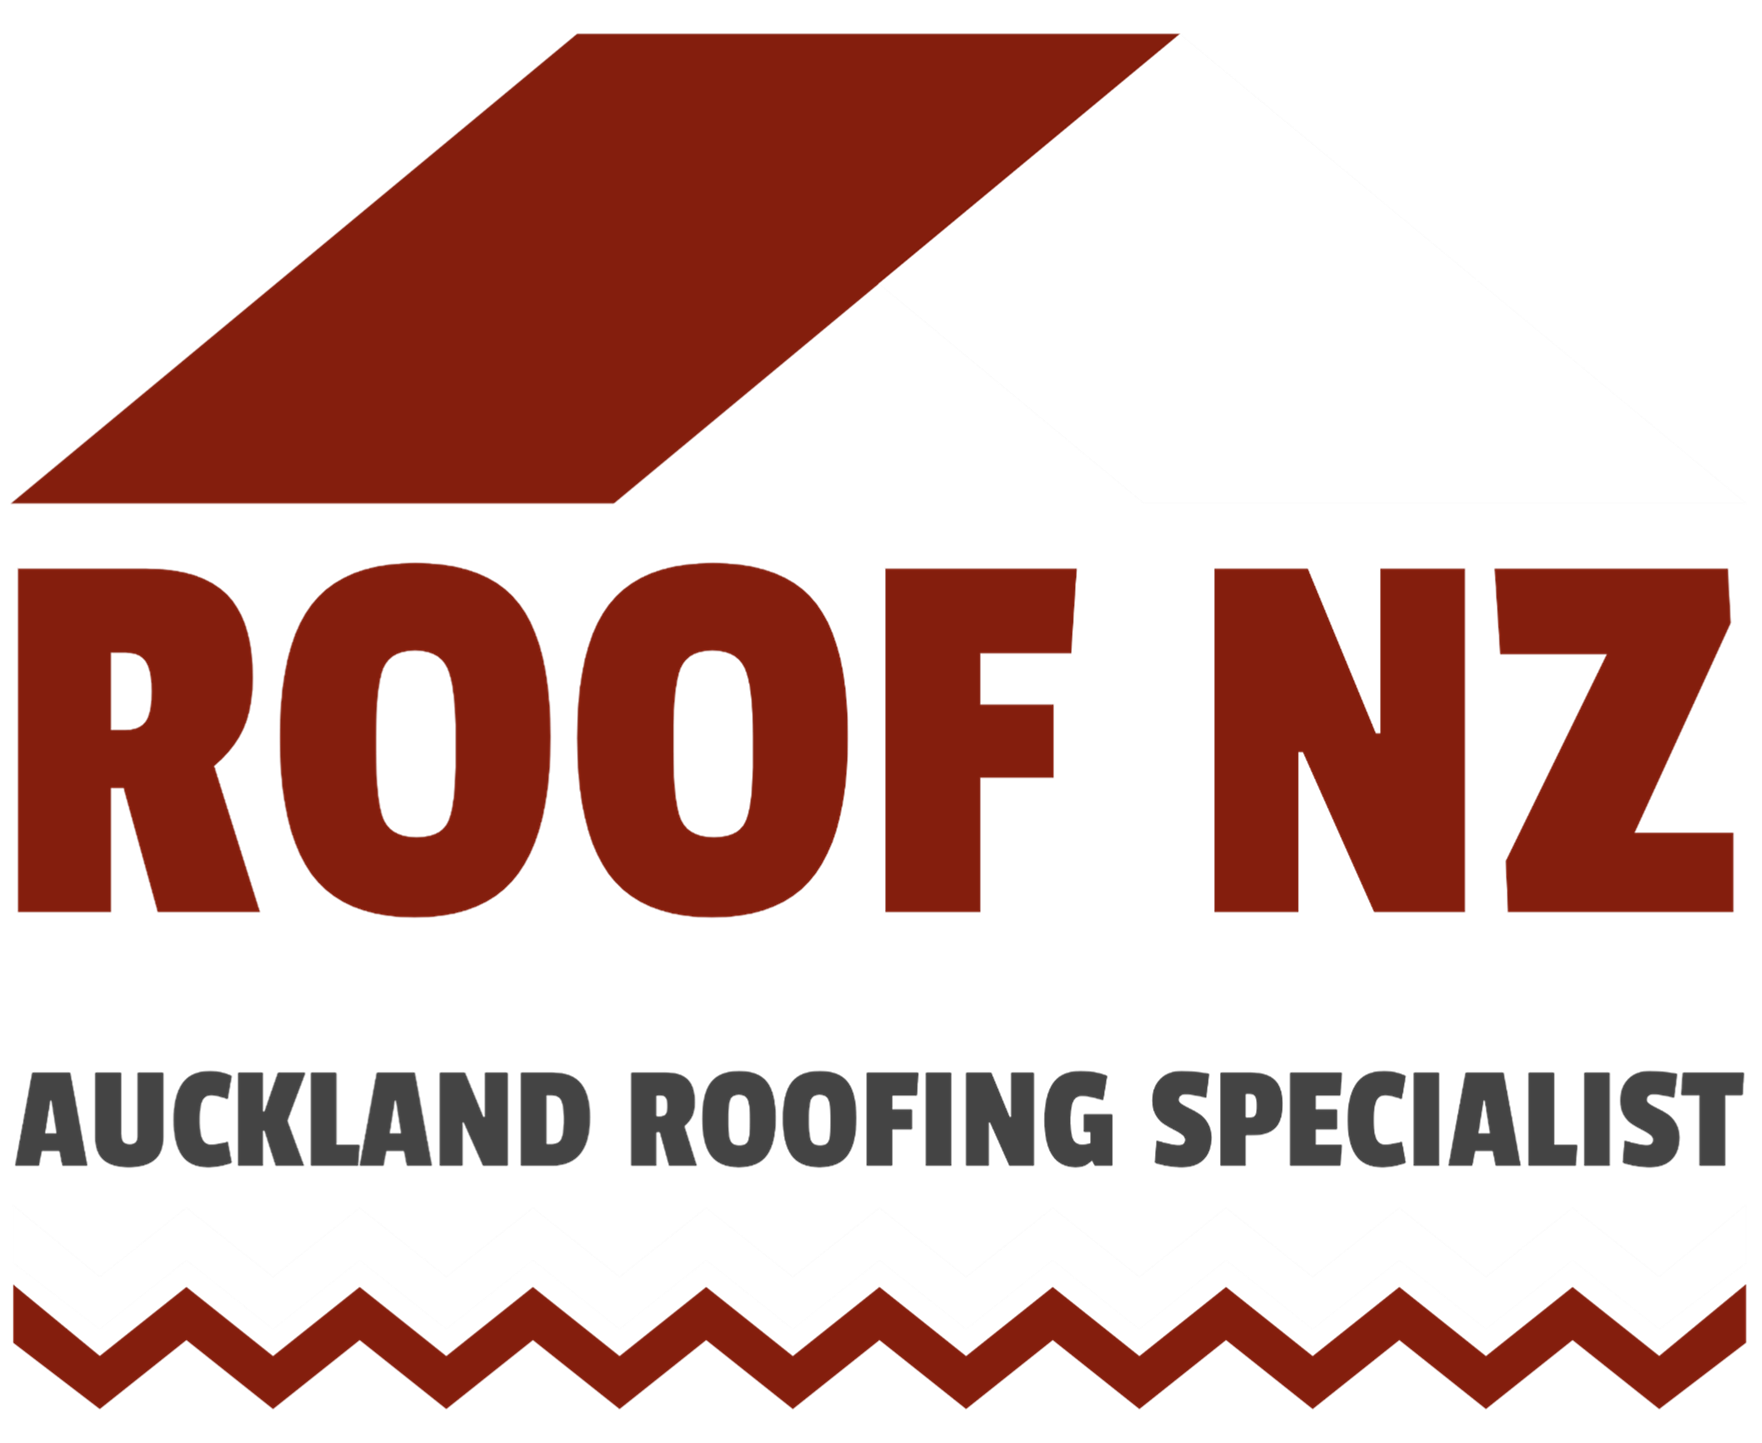 Roof NZ - Auckland Roofing Specialists